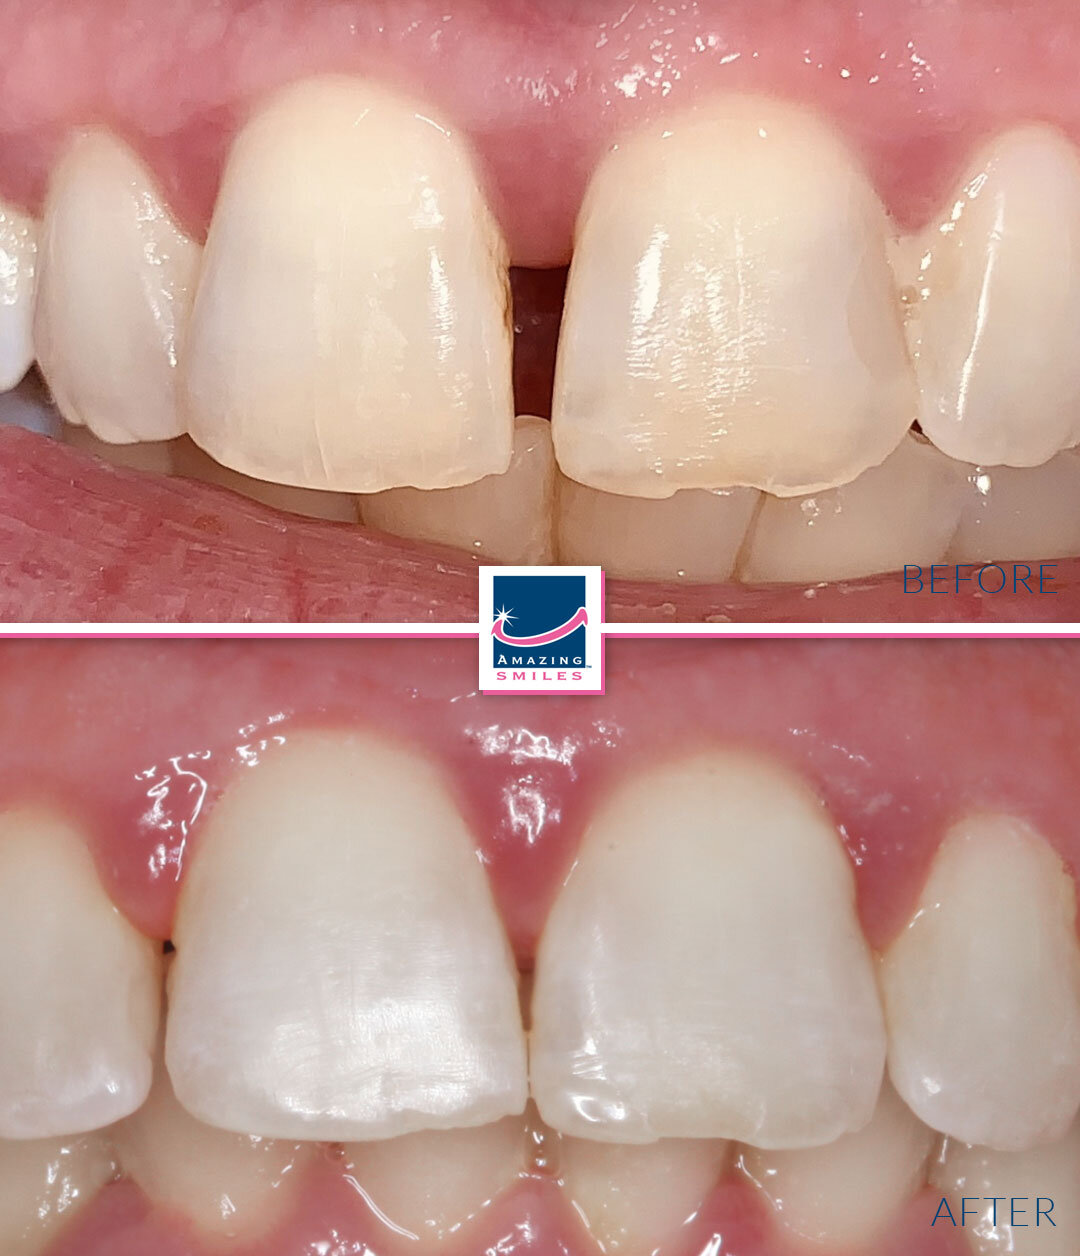 Smile Restoration - Before And After